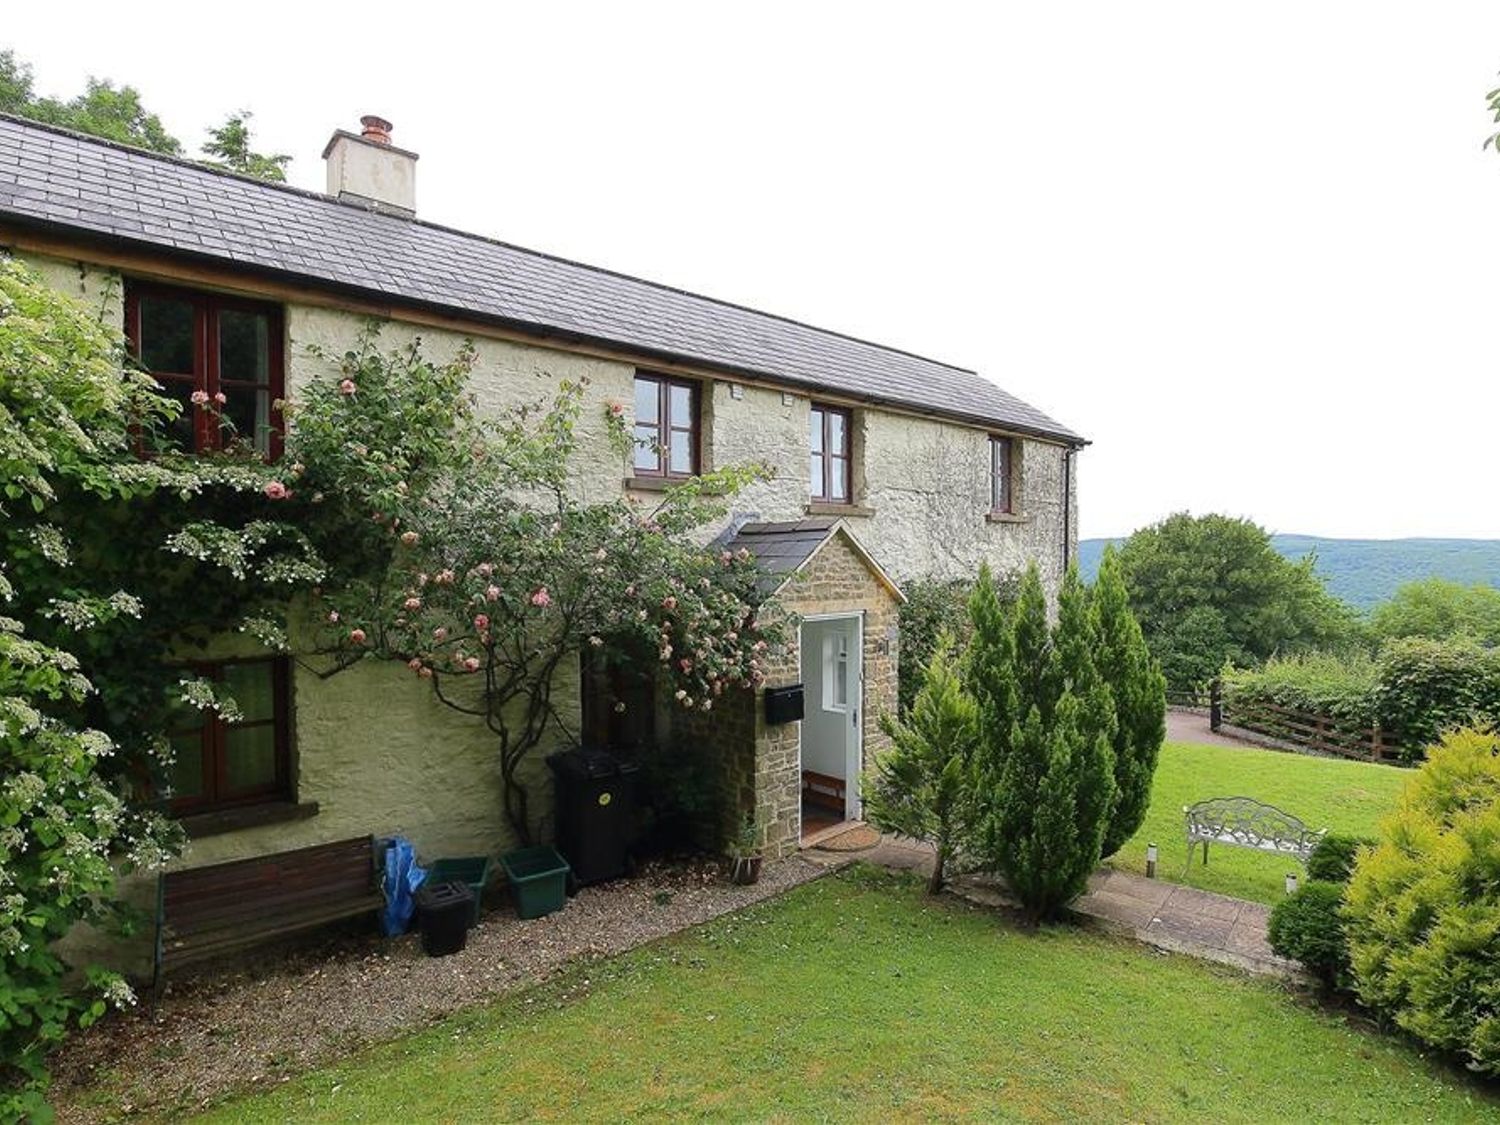 The Cottage - Cotswolds - 990342 - photo 1